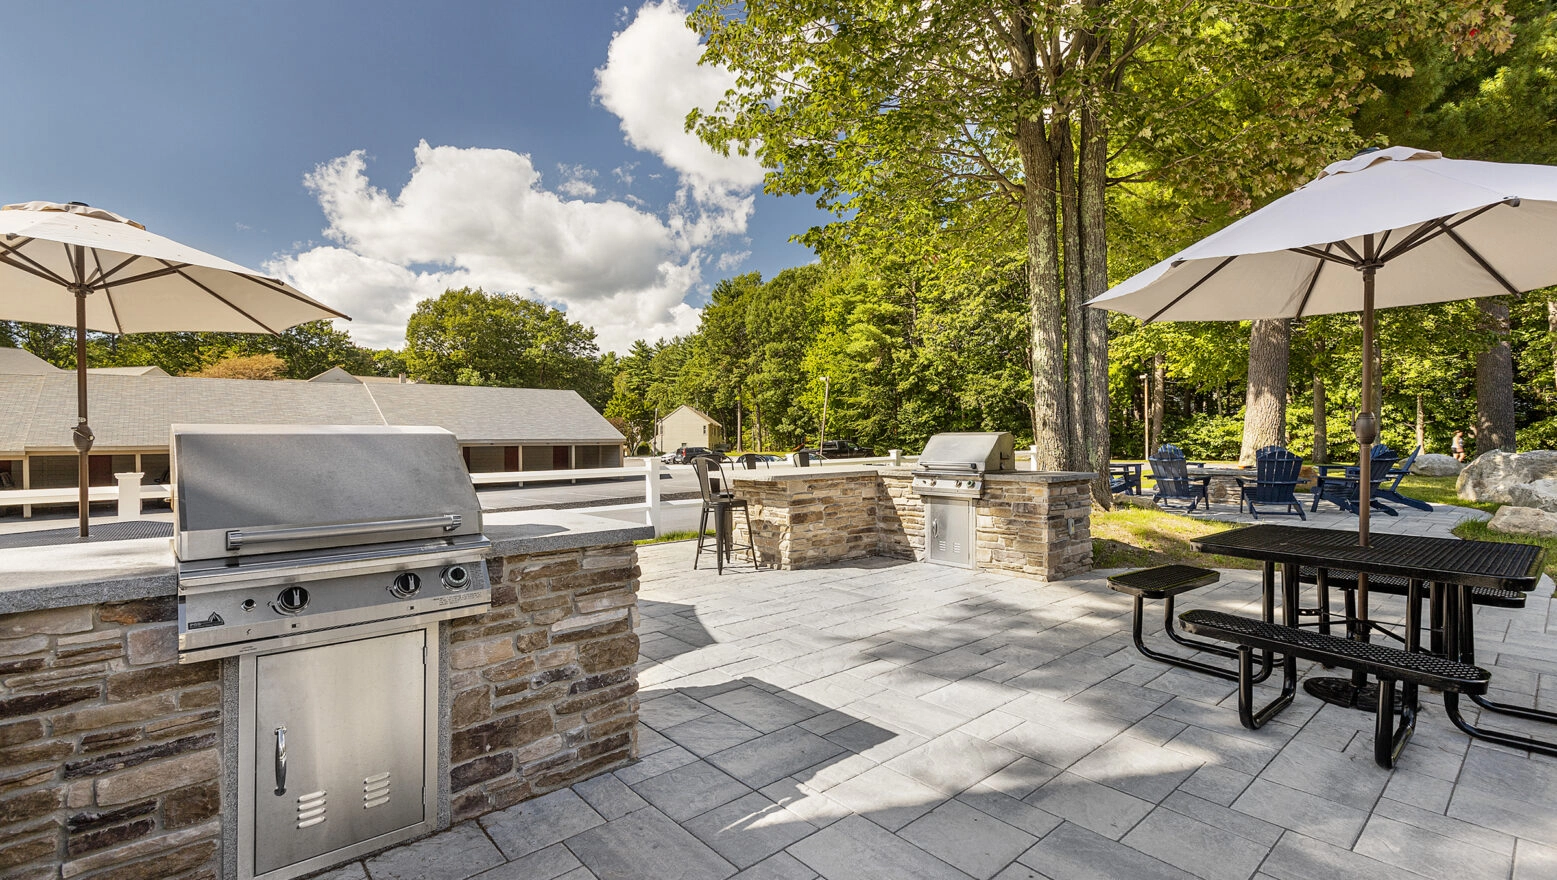 Grill stations and seating in the resident amenity area at Cranmore Ridge Apartments in Concord, NH. Dex by Terra Hardscape.